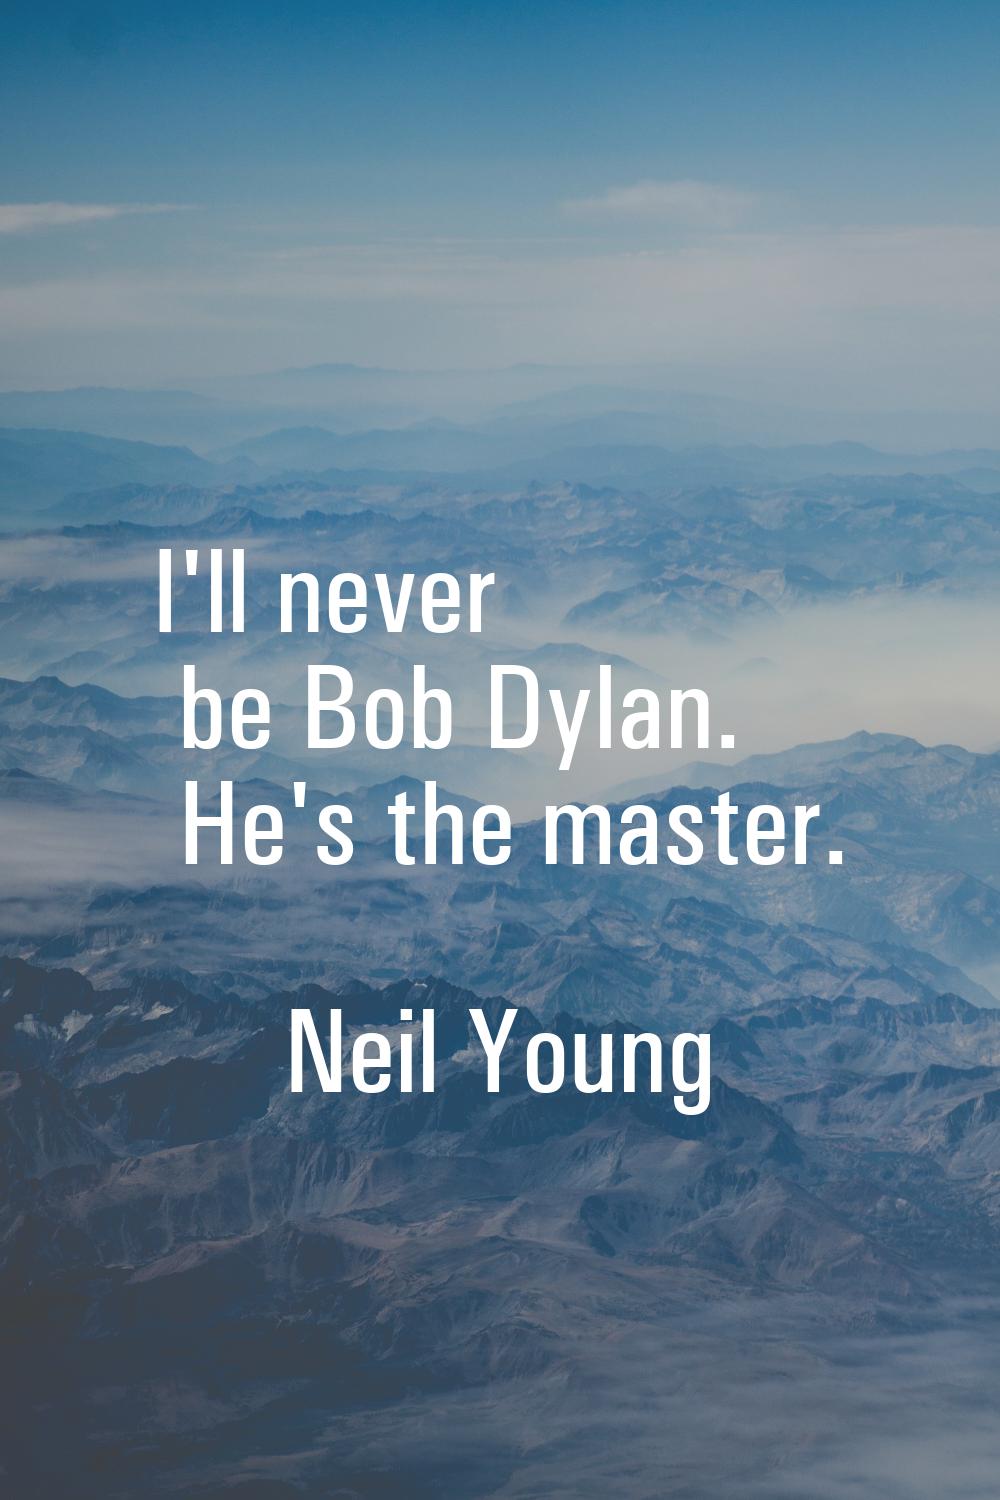 I'll never be Bob Dylan. He's the master.